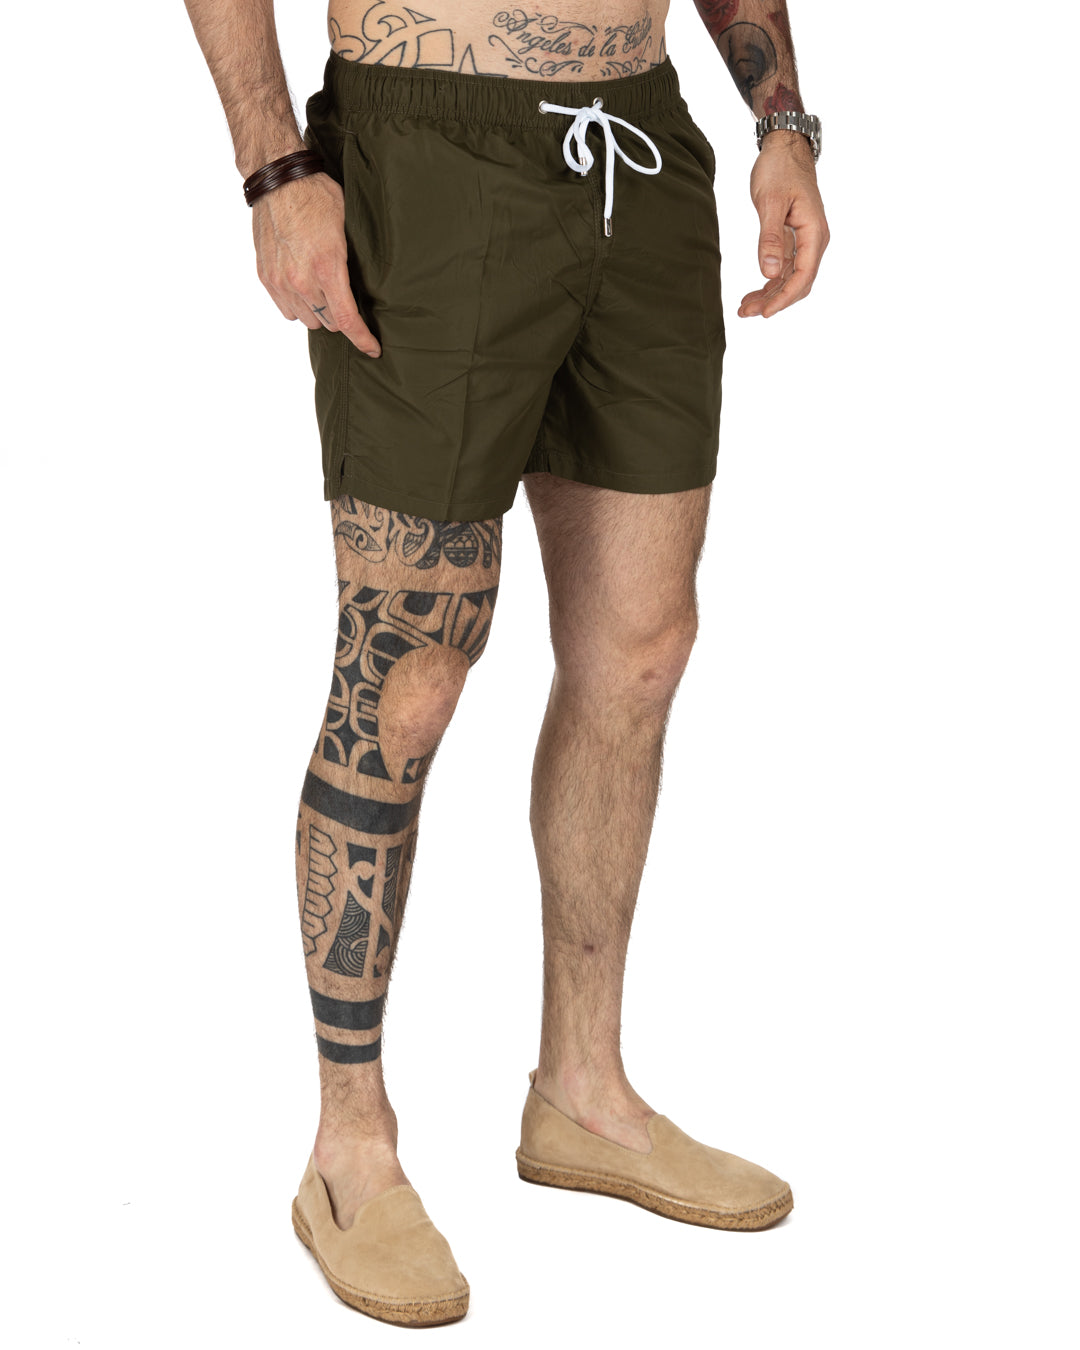 Maillot de bain - Solid Army Green